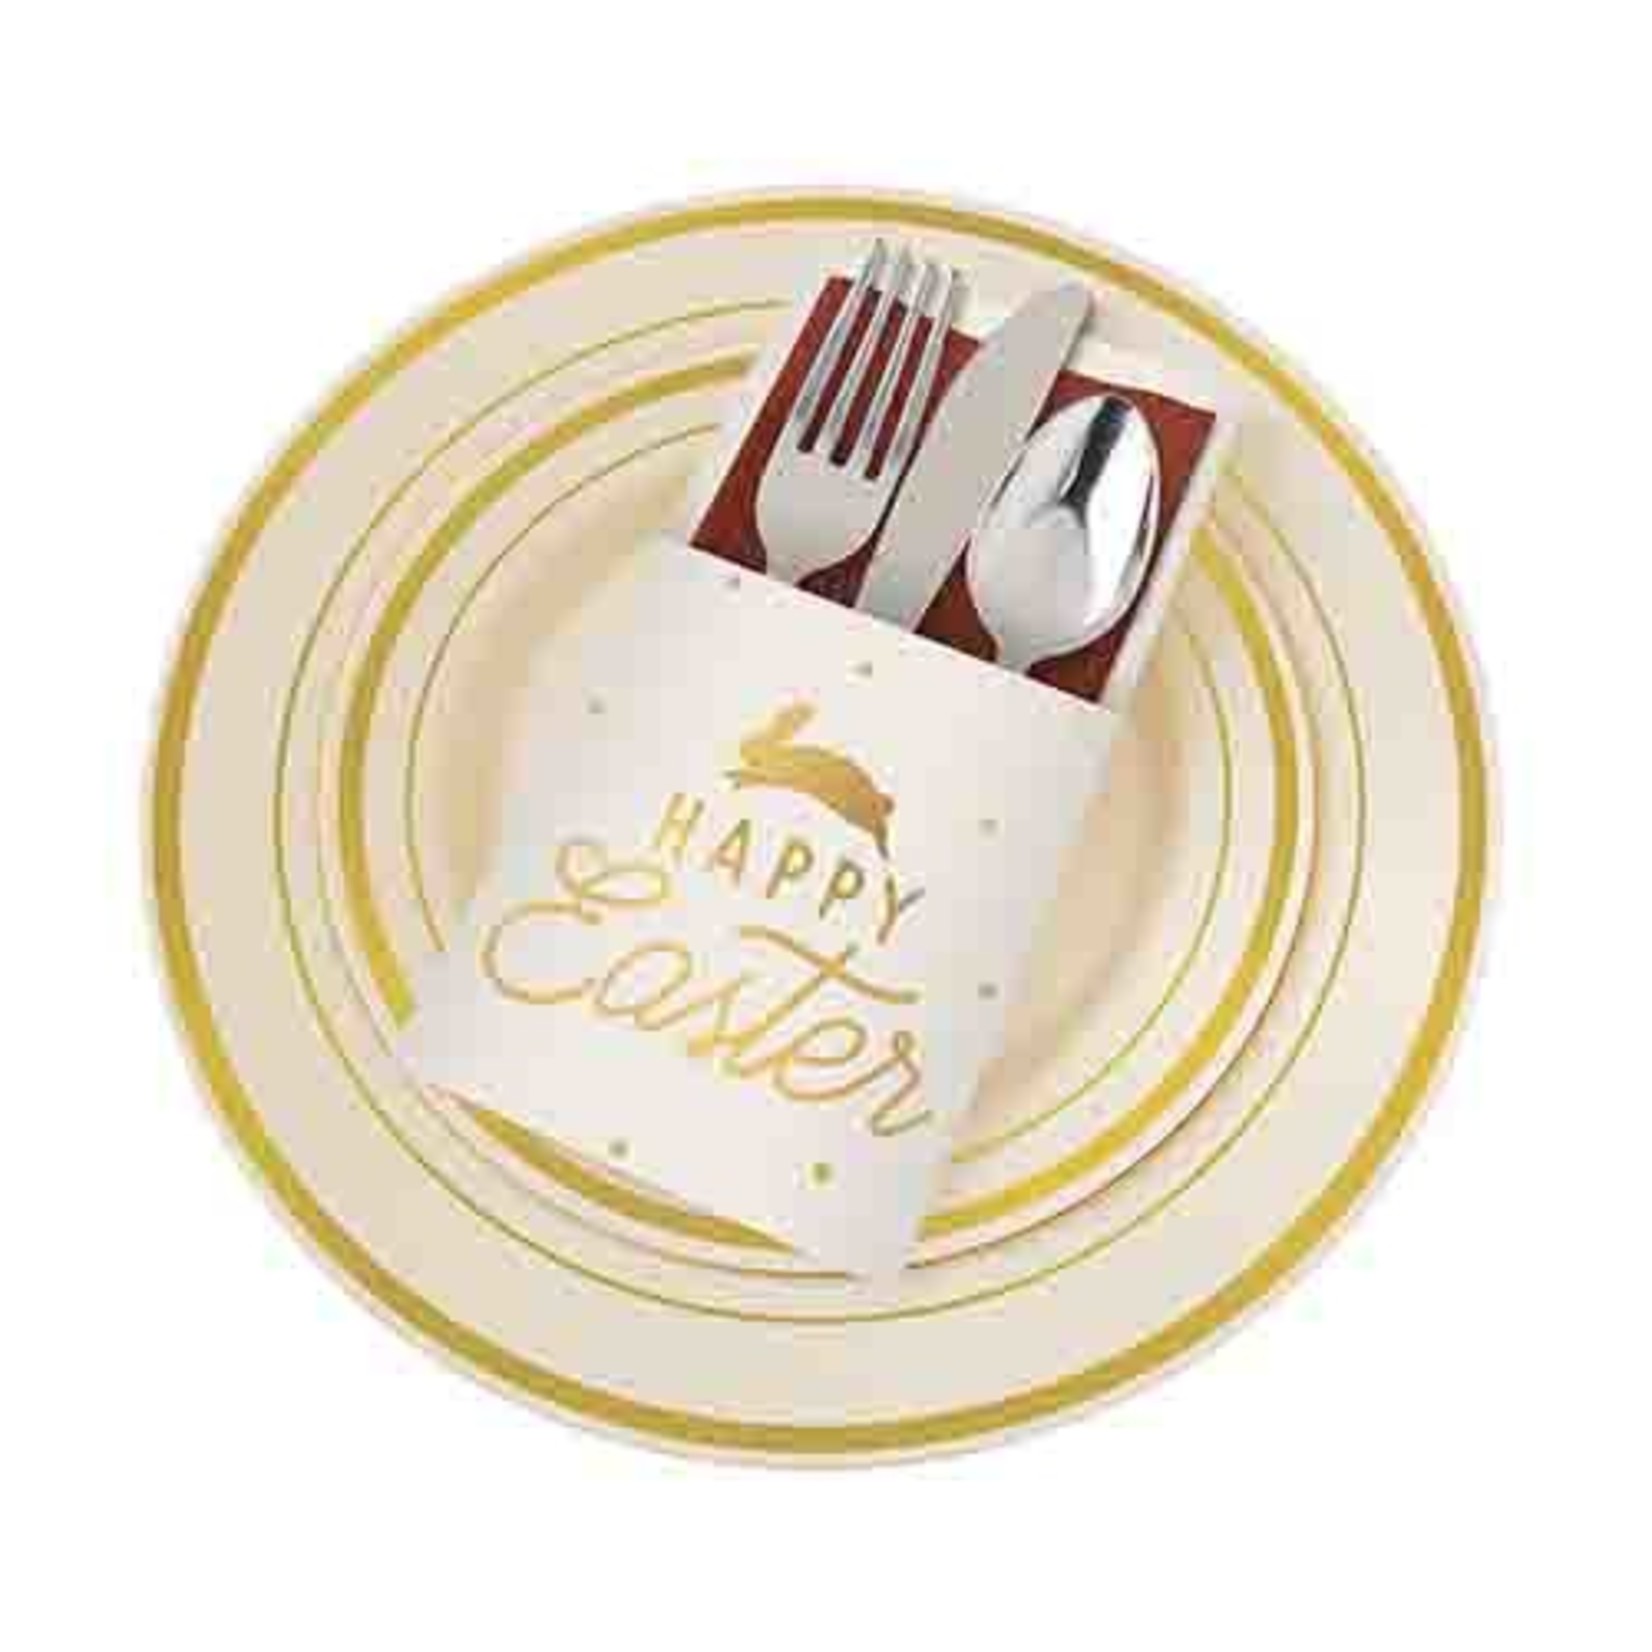 Amscan Happy Easter Cutlery Holders - 12ct.